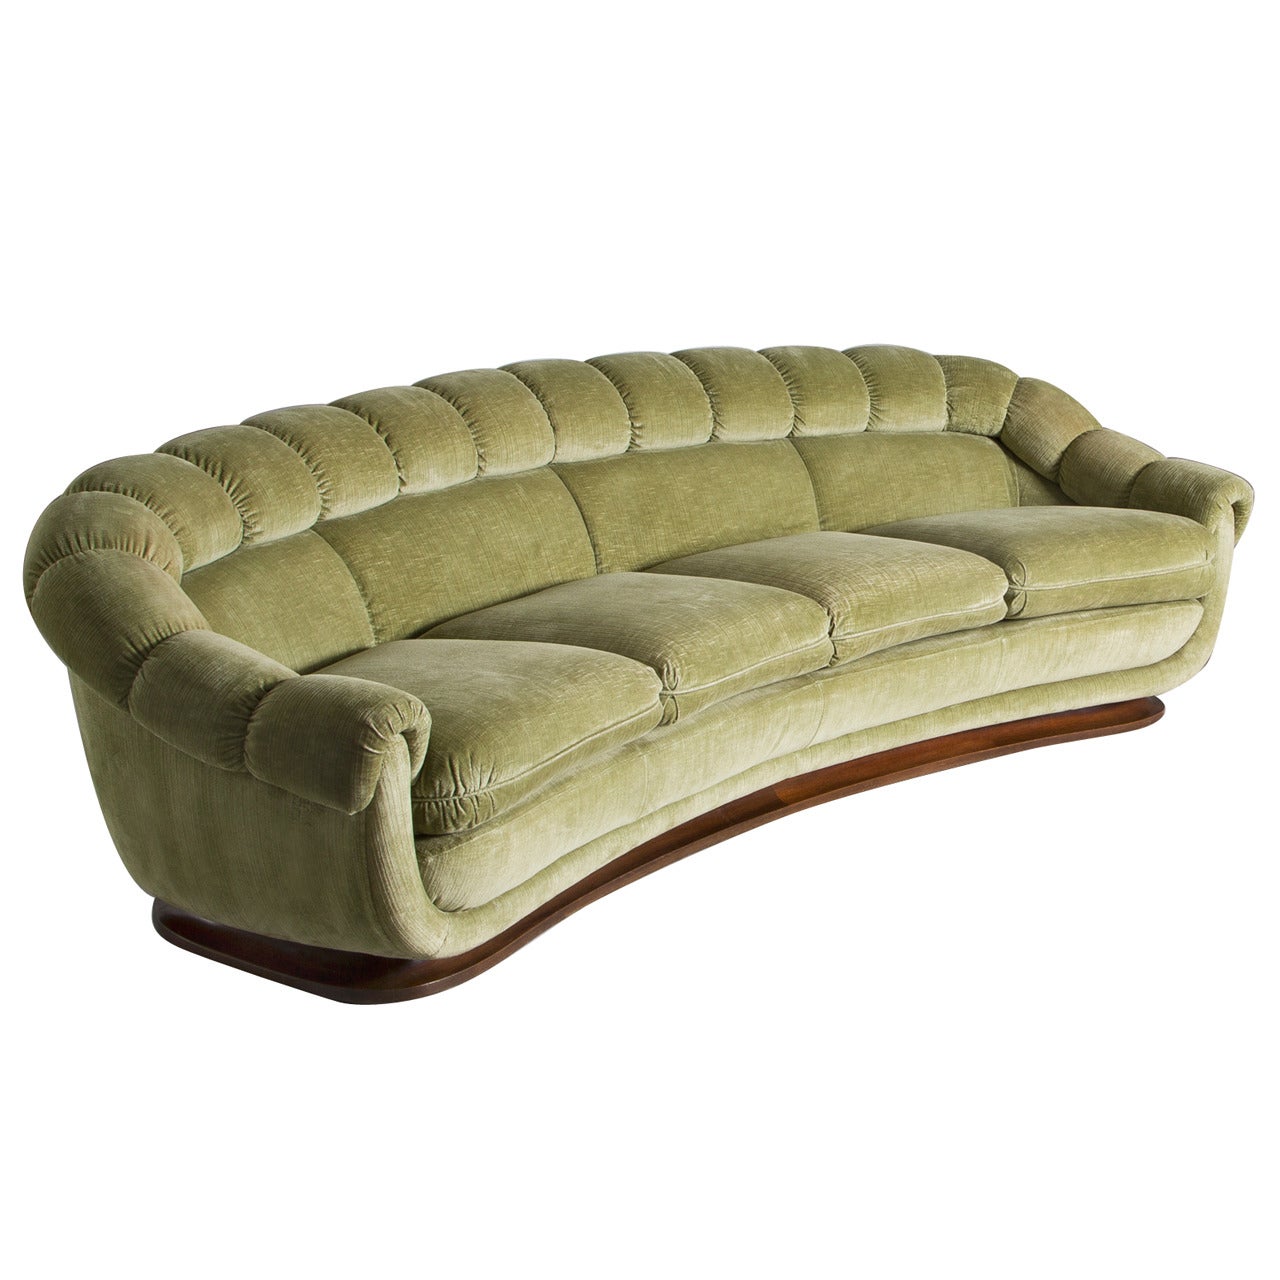 Elegant Curved Italian Sofa with Round Shapes